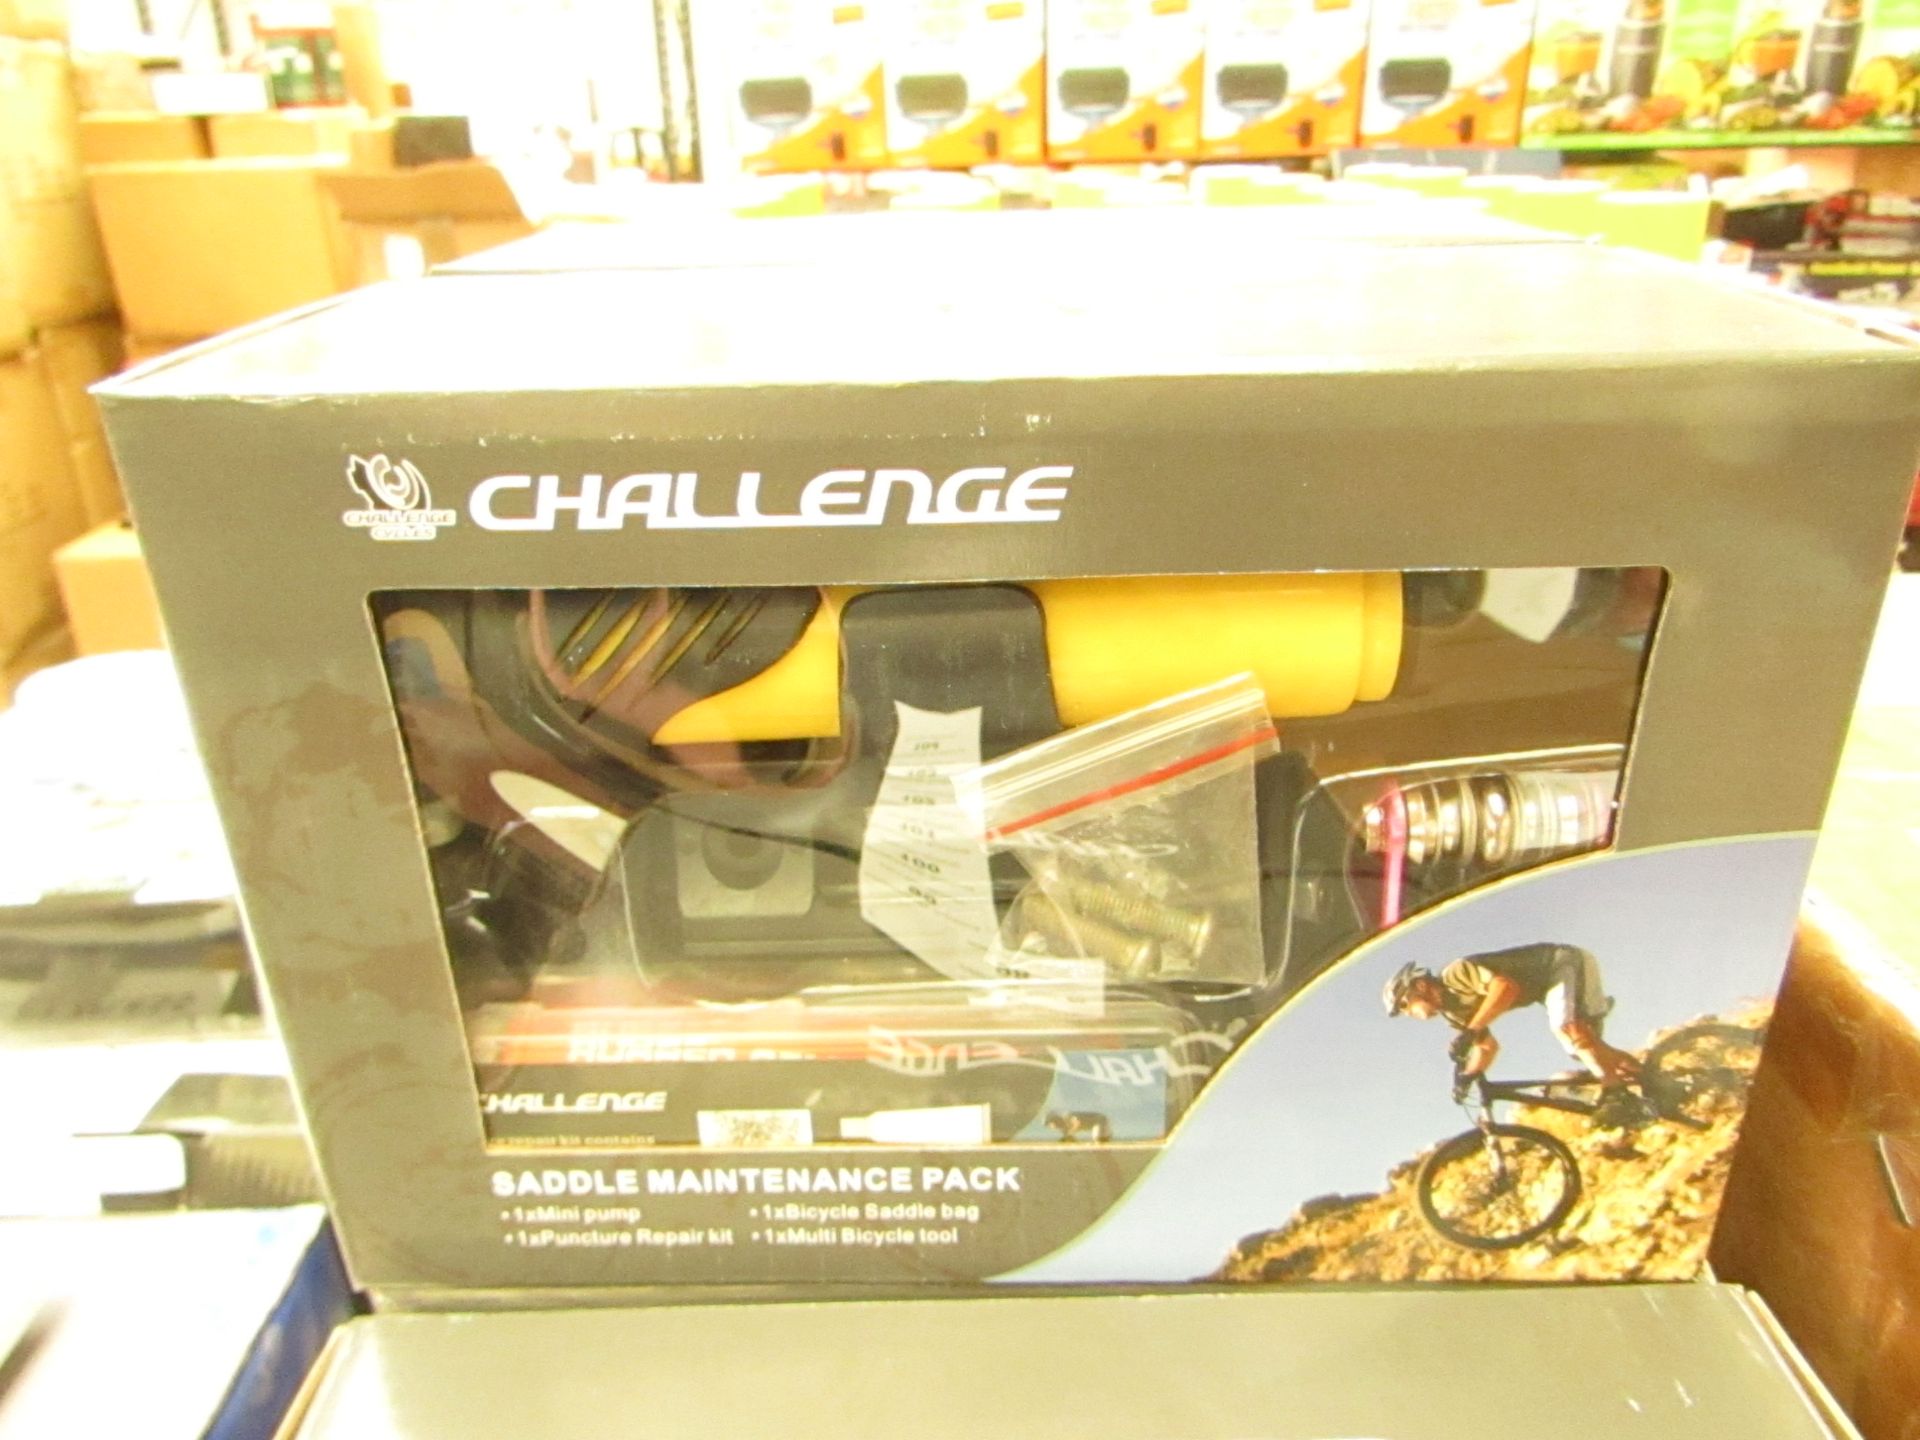 Challenge saddle maintenance pack, new and boxed.